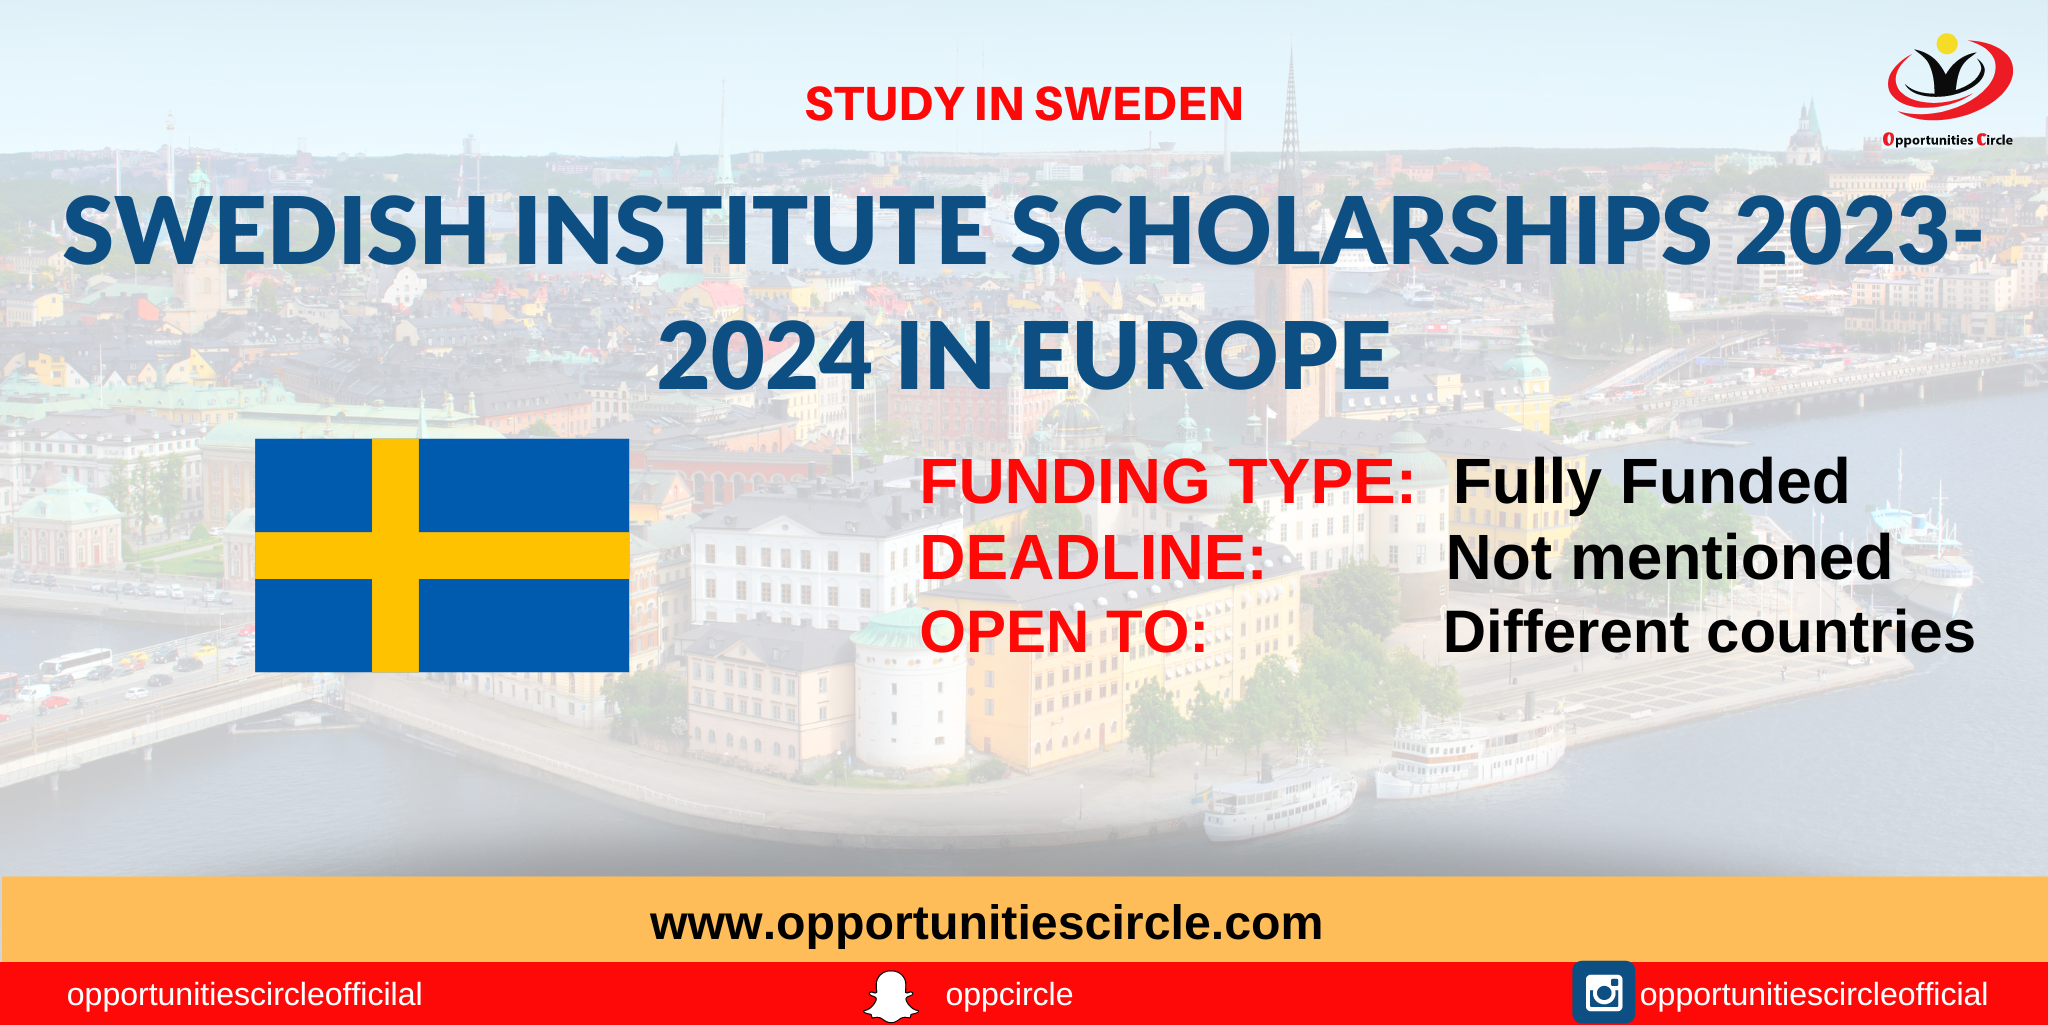 fully funded phd scholarships in sweden for international students 2023